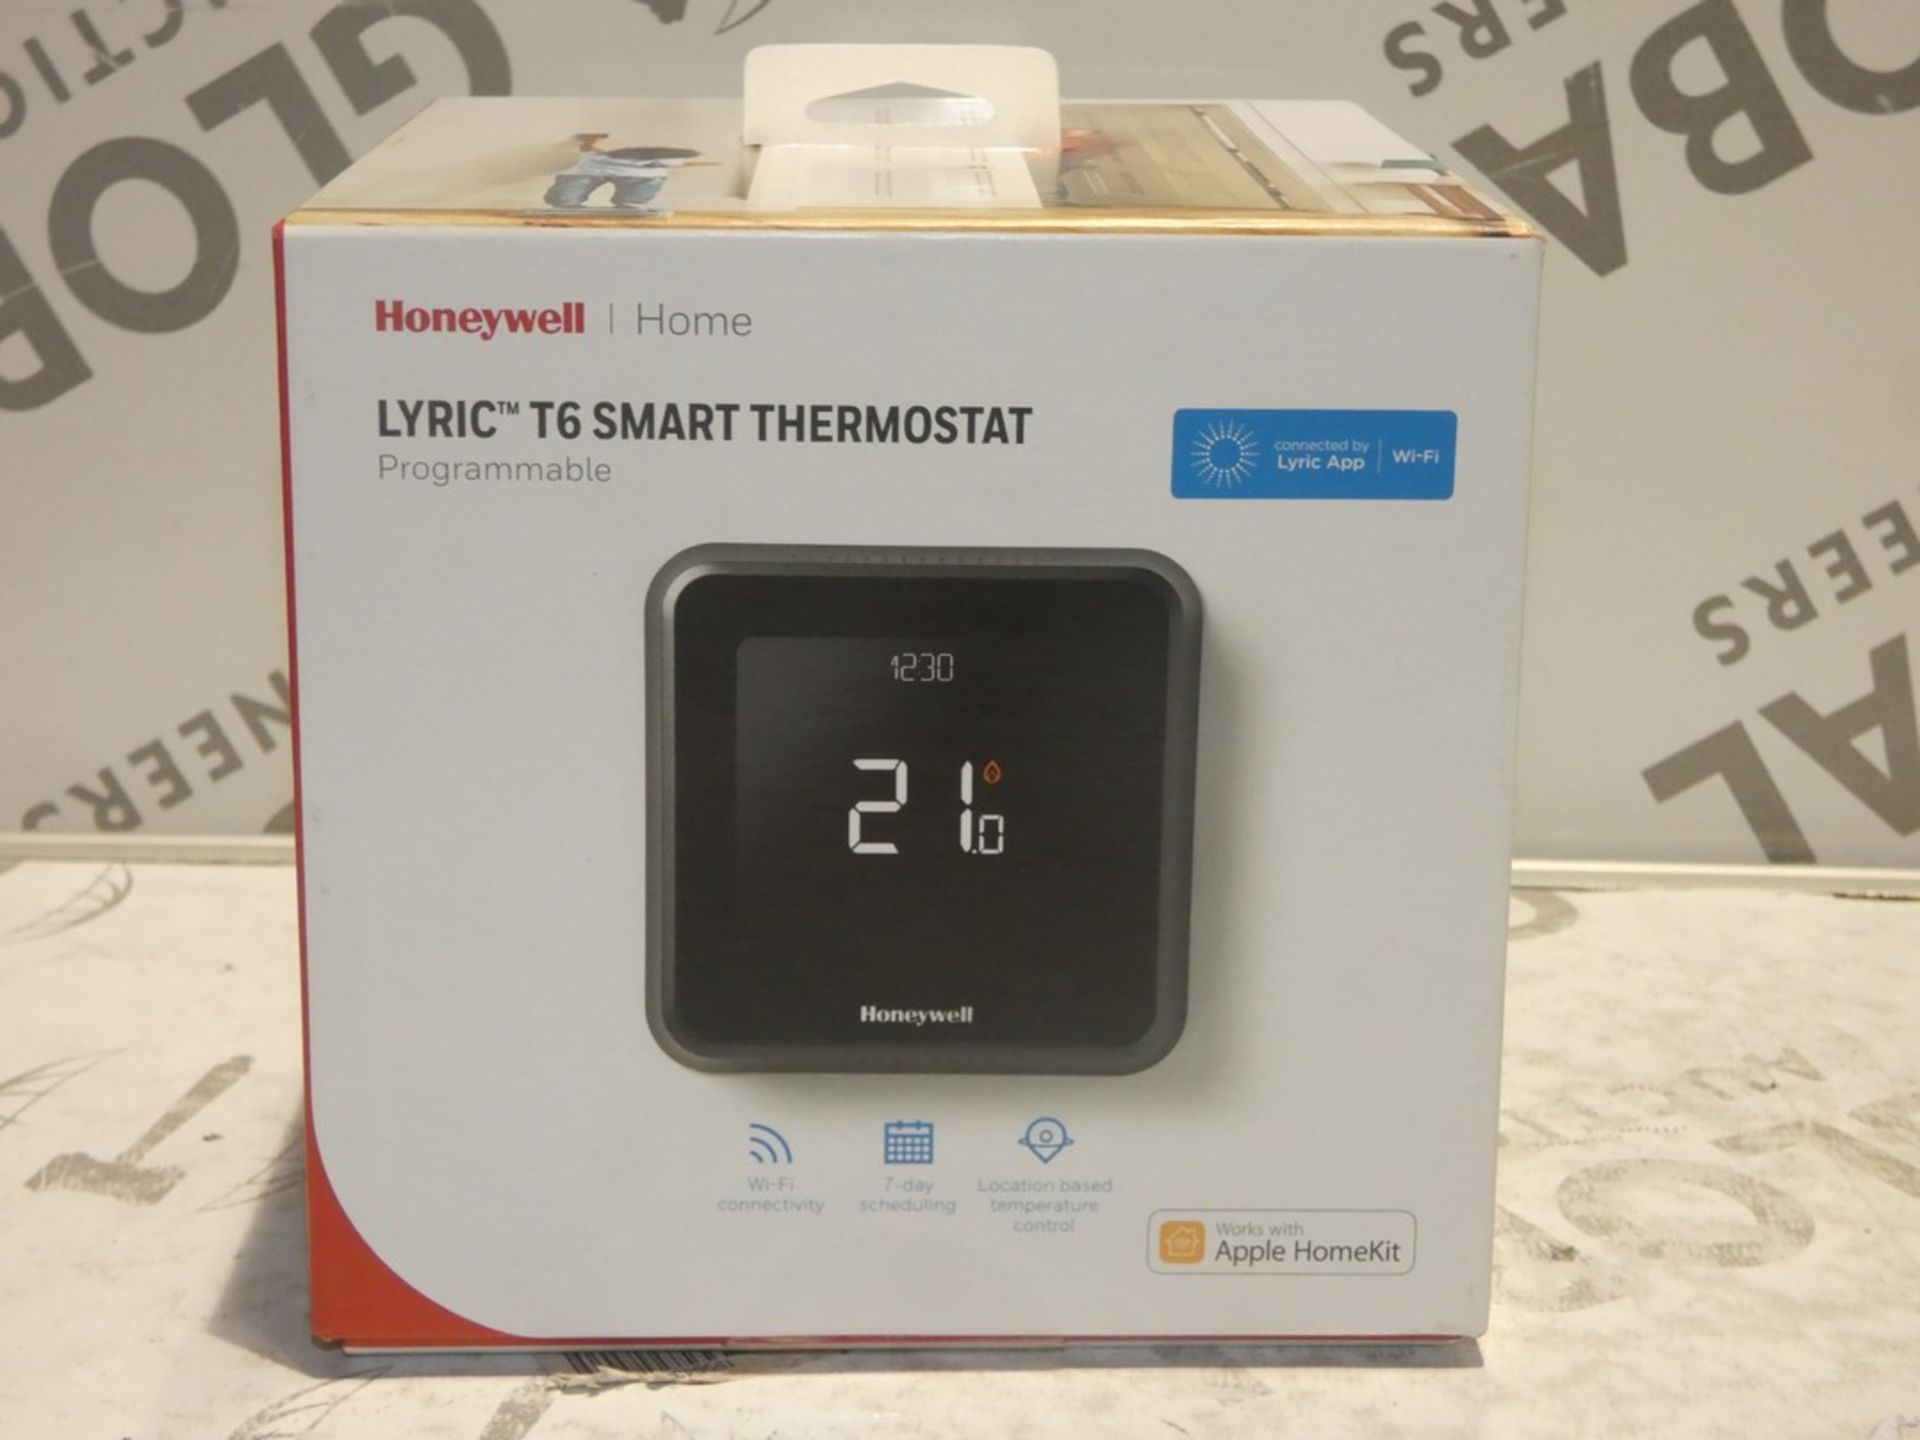 Boxed Honeywell Home Lyric T6 Smart Thermostat RRP£125.0